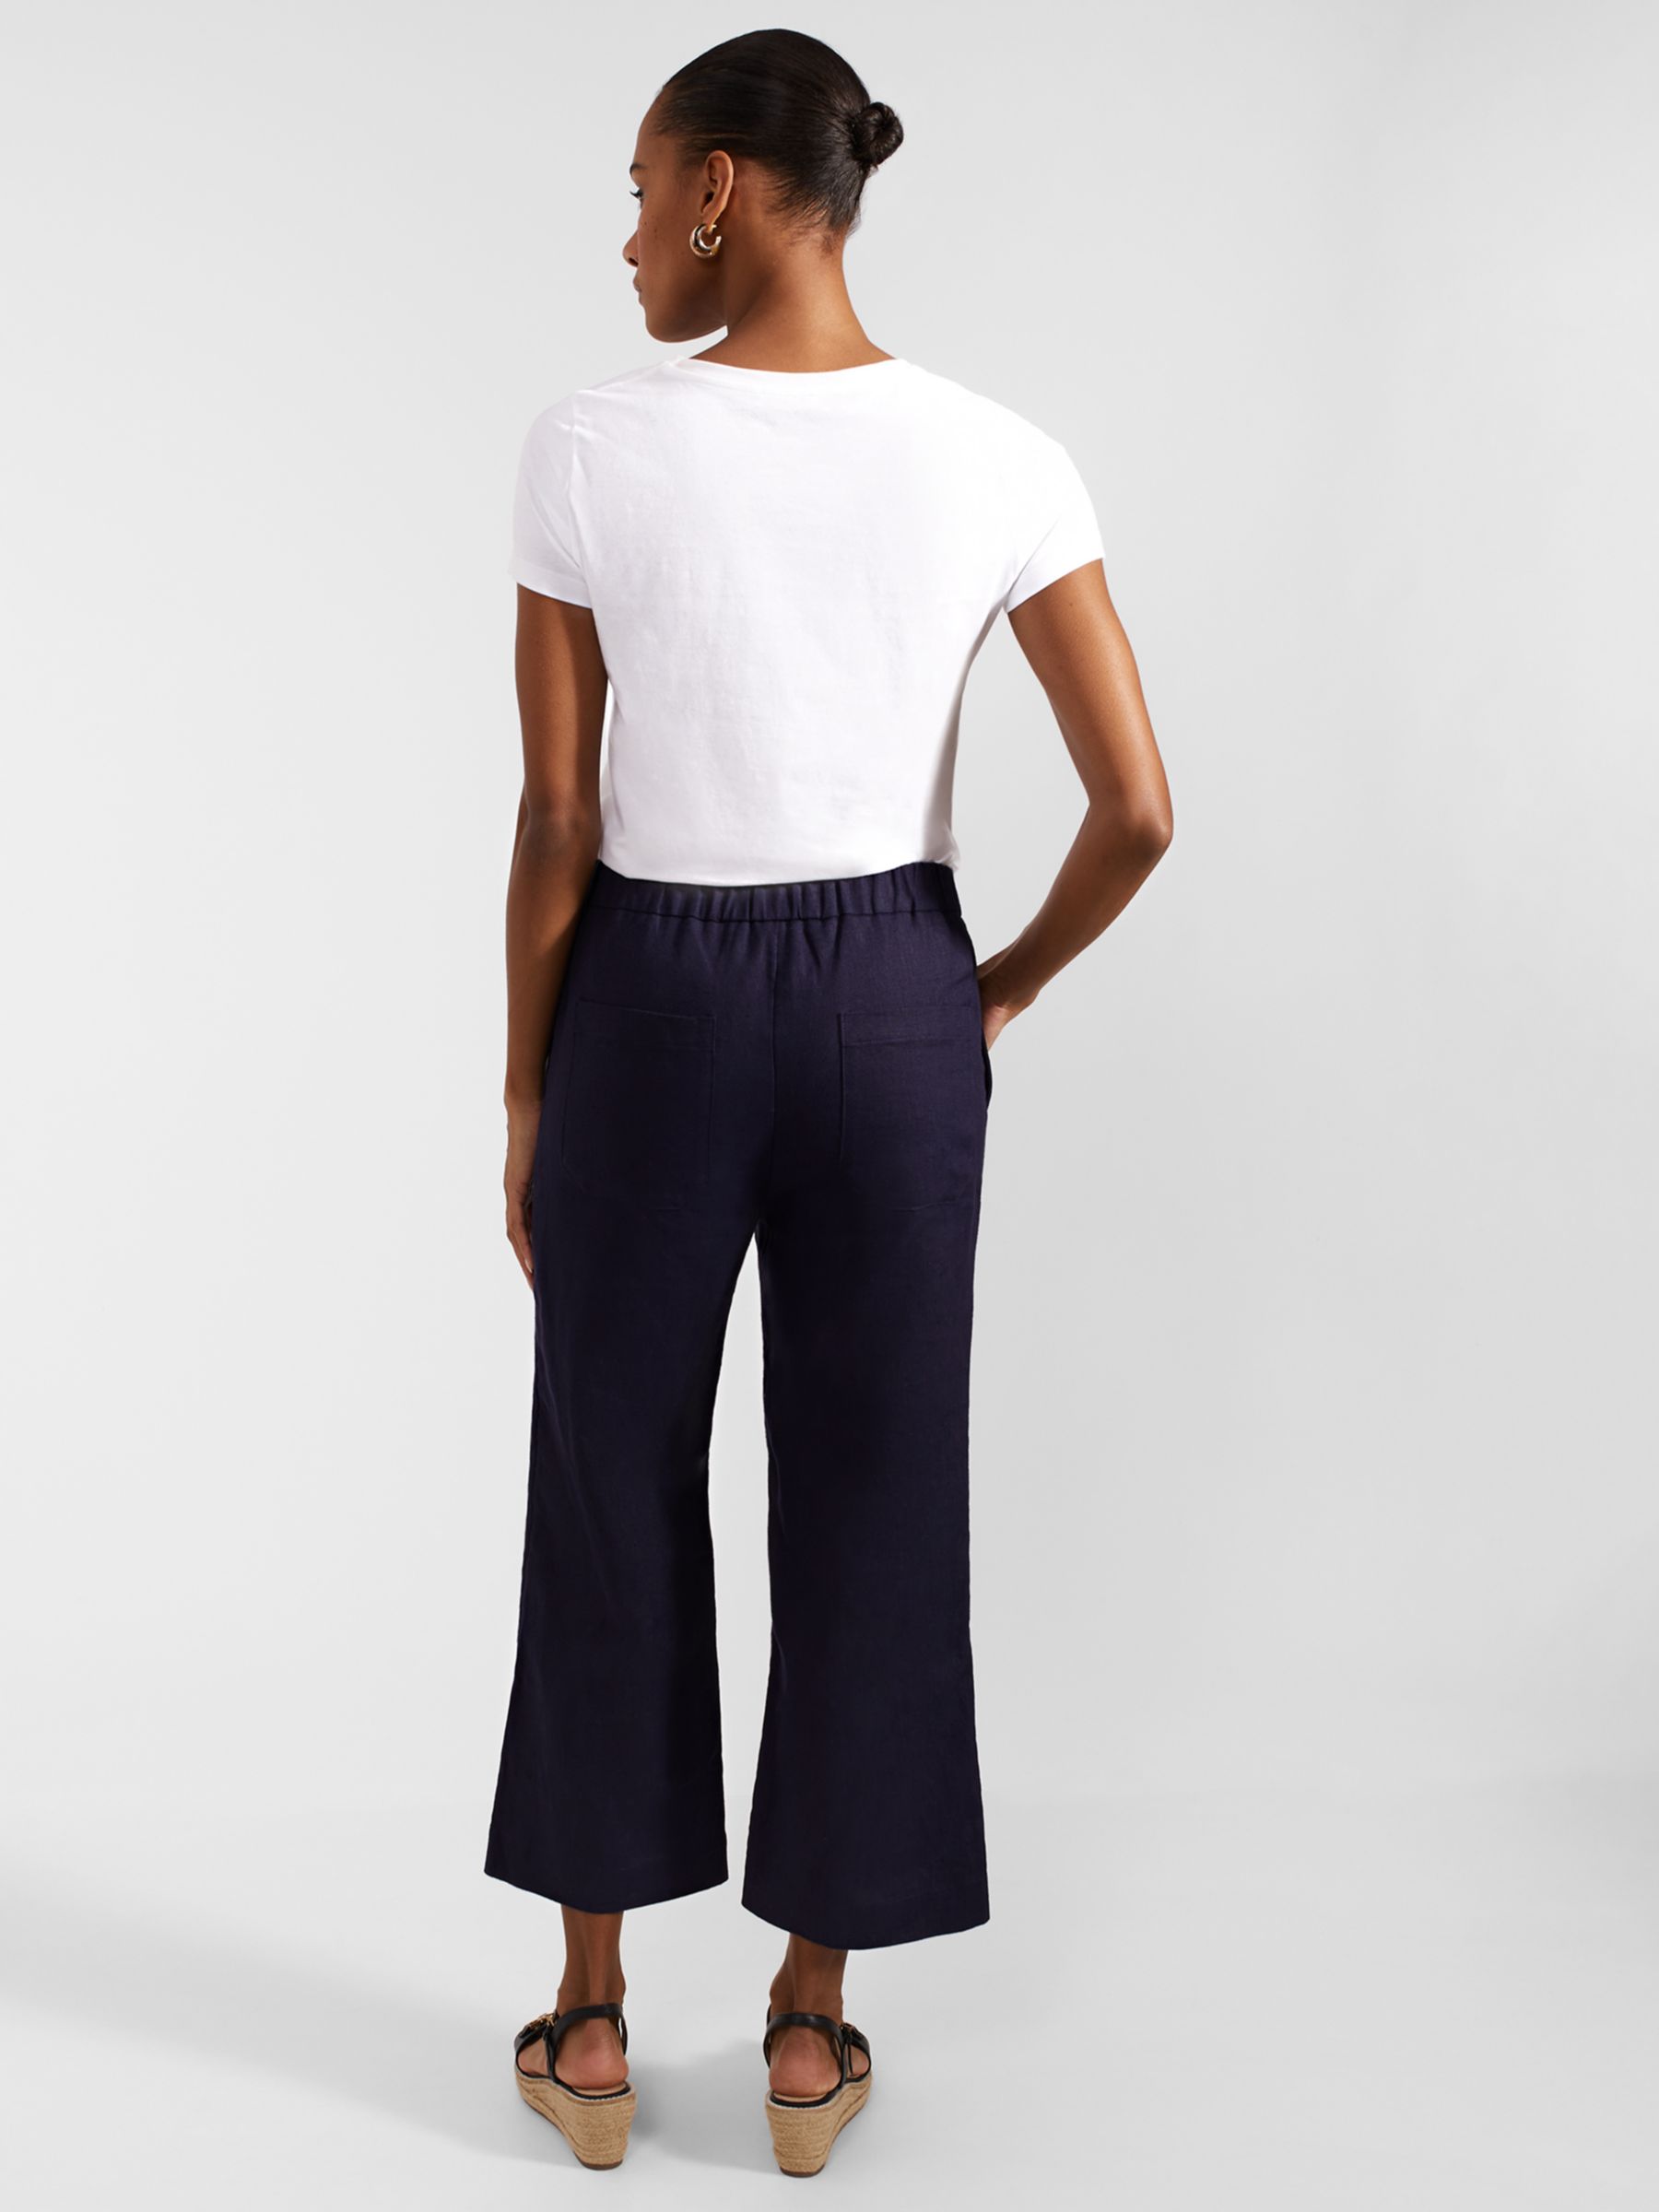 Hobbs Lillie Cropped Linen Kick Flare Trousers, True Navy, 10